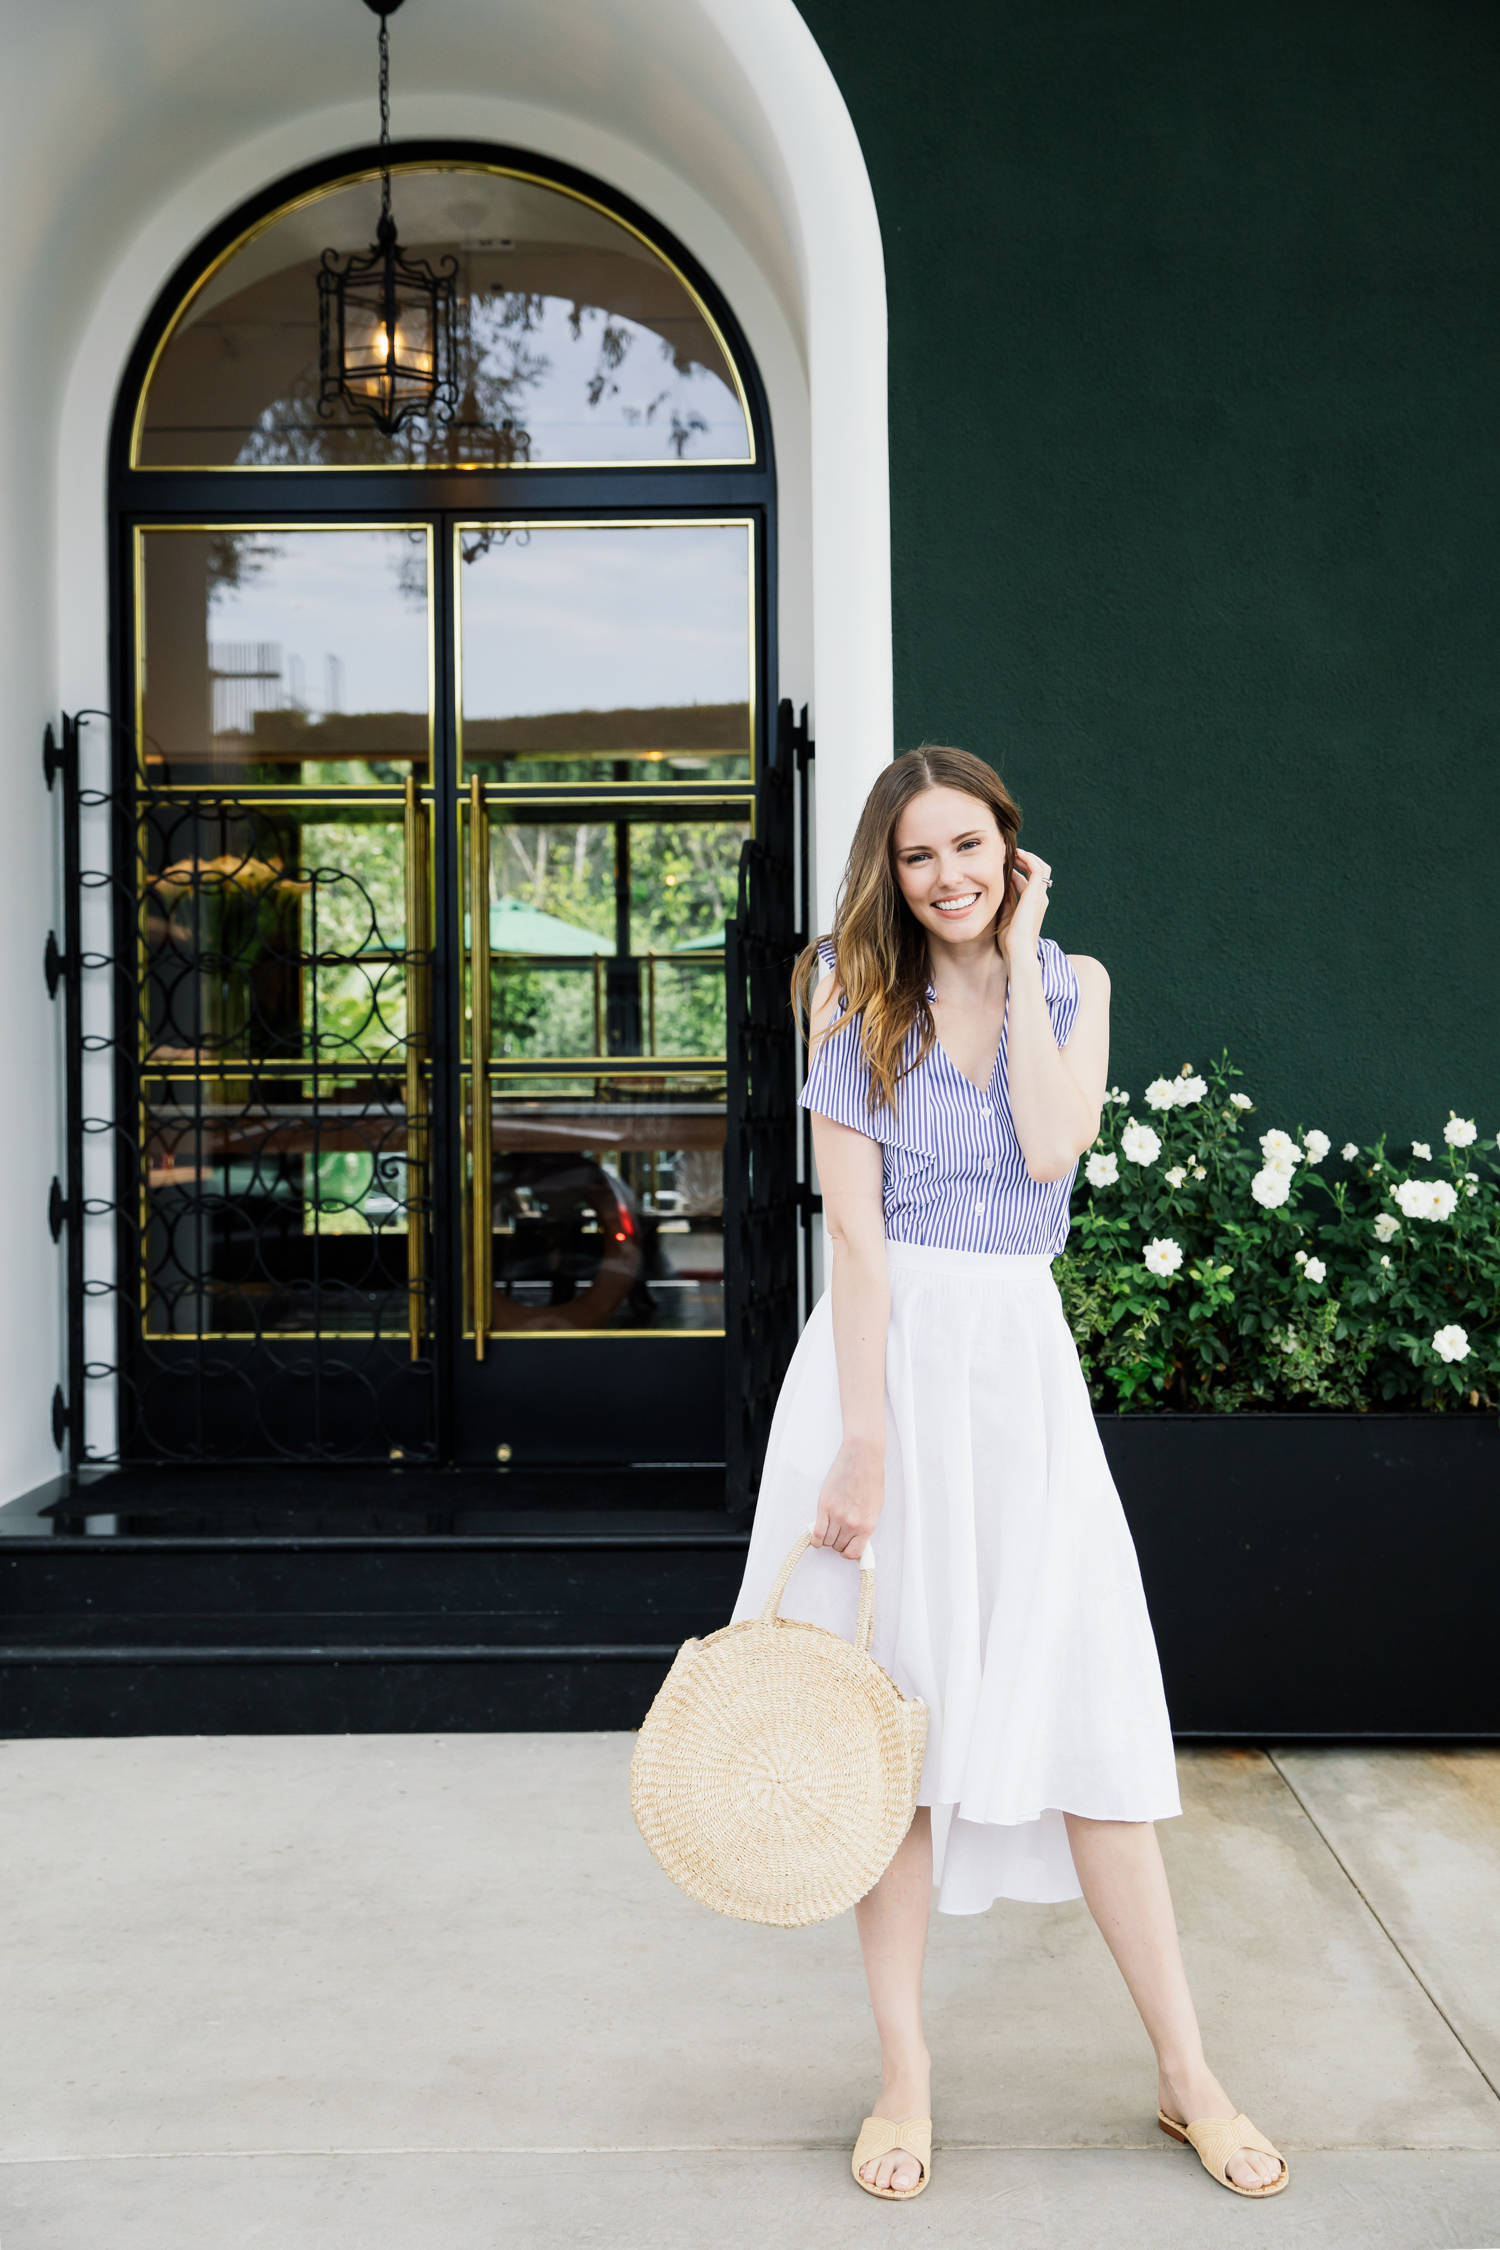 Alyssa Campanella The A List blog Favorite Summer Sandals wearing Carrie Forbes Salon sandals and Clare V Alice Tote